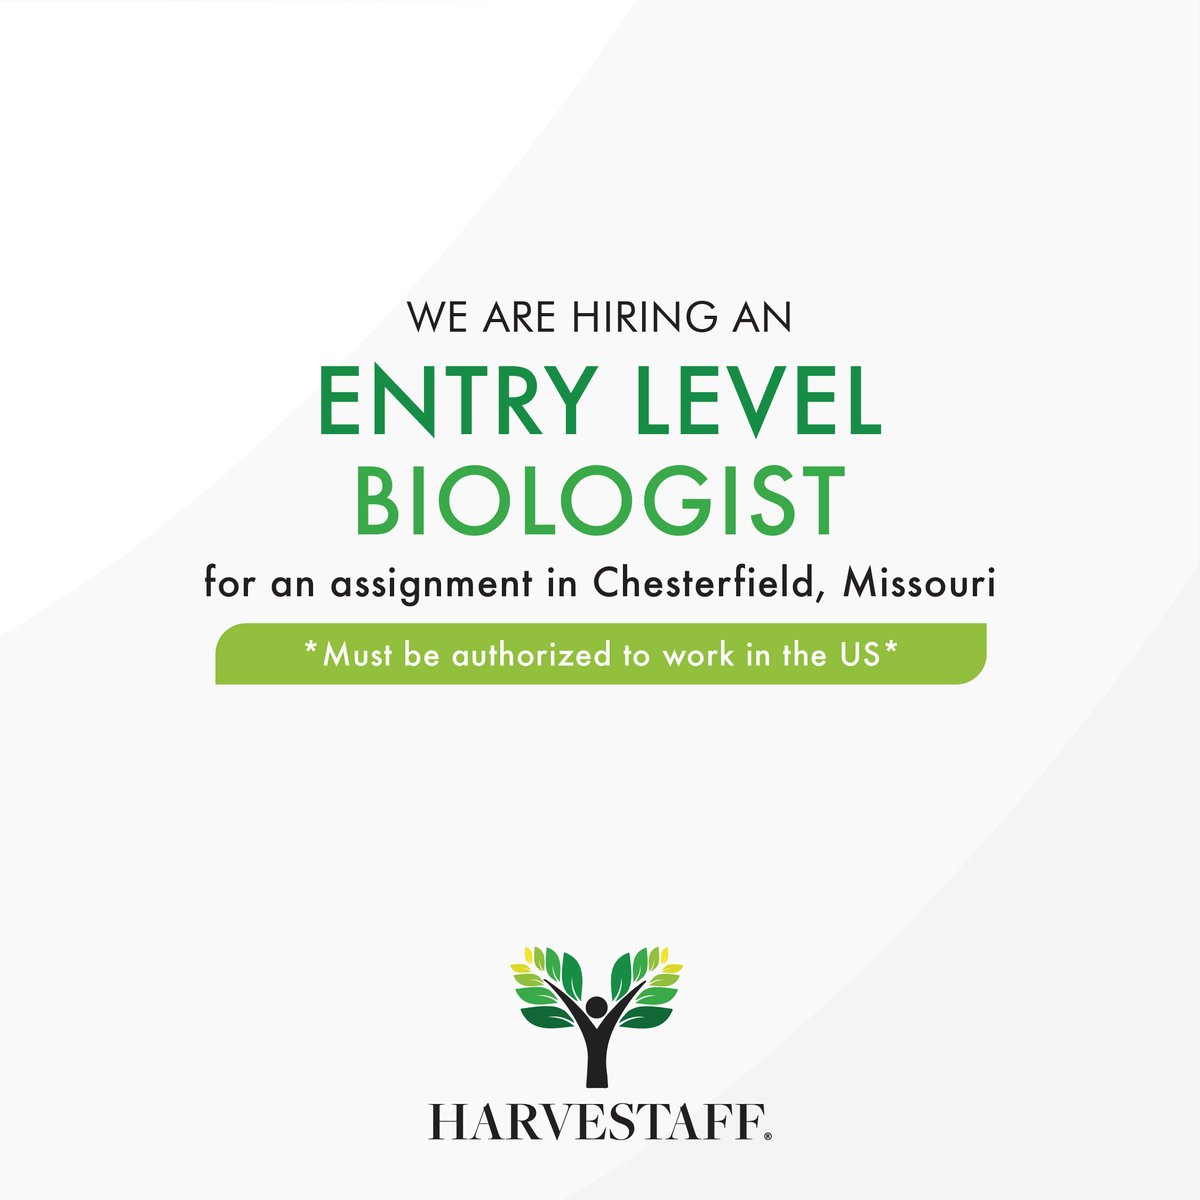 We are hiring an Entry Level Biologist for an assignment in Chesterfield, Missouri, to apply and for more information please visit the following link:

job.harvestaff.com/41842_Biologist

#Biologist #Missouri #Job #Jobs #HiringNow #JobAlert #Hiring #Vacancy